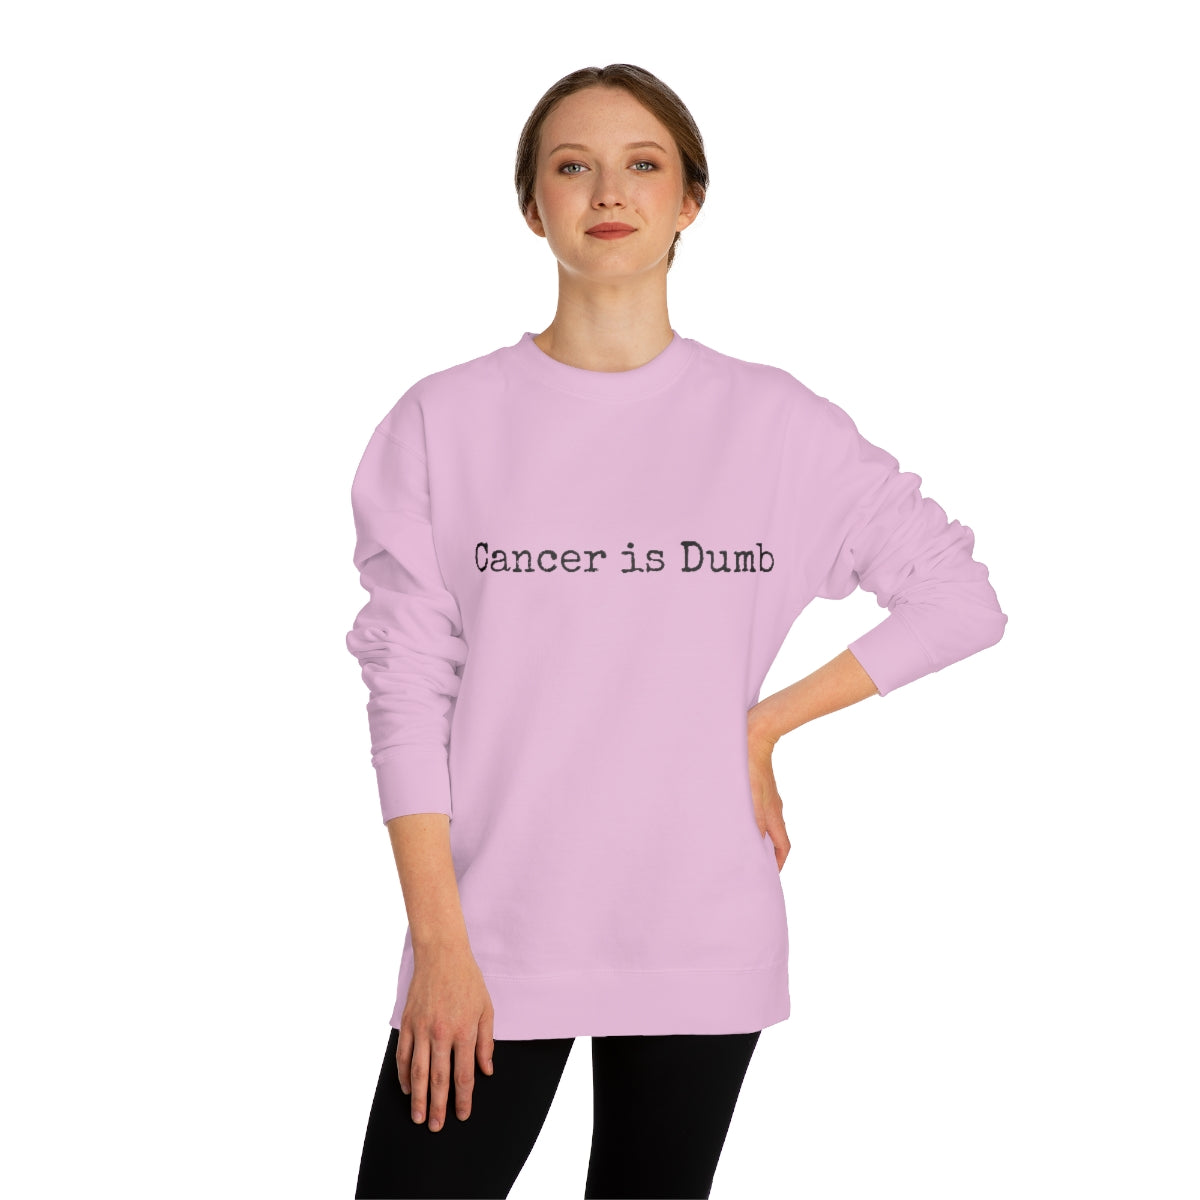 Unisex Crew Neck Sweatshirt Mens Womens Apparel Clothing Anti Cancer Cancer is Dumb Survivor Support Humorous Funny